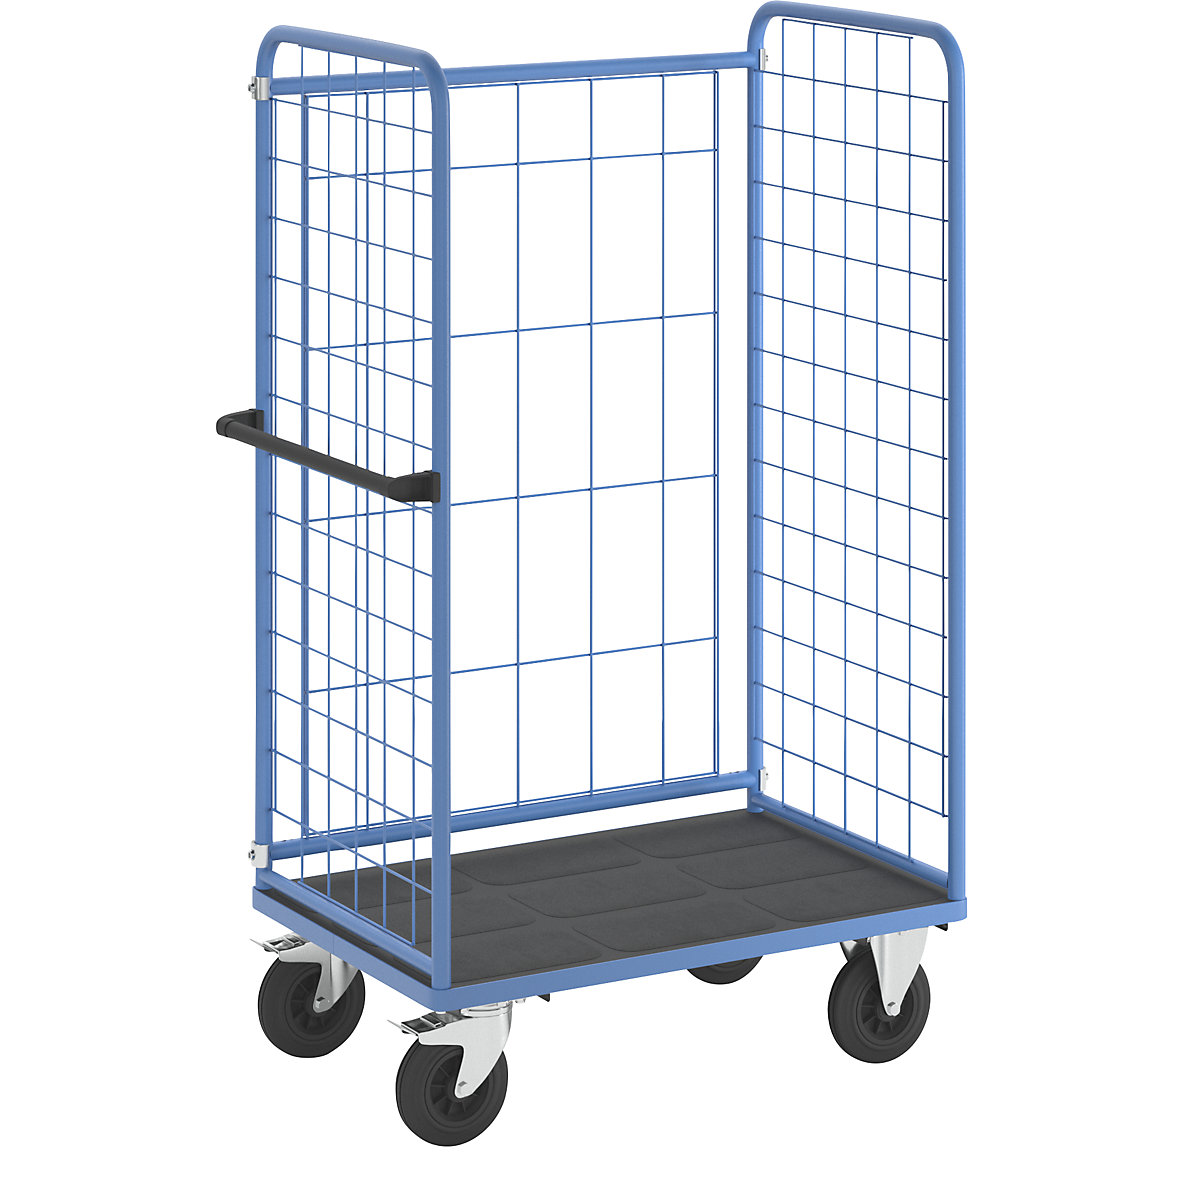 Shelf truck, wire mesh on three sides – eurokraft pro, max. load 500 kg, solid rubber tyres, platform LxW 940 x 630 mm-1